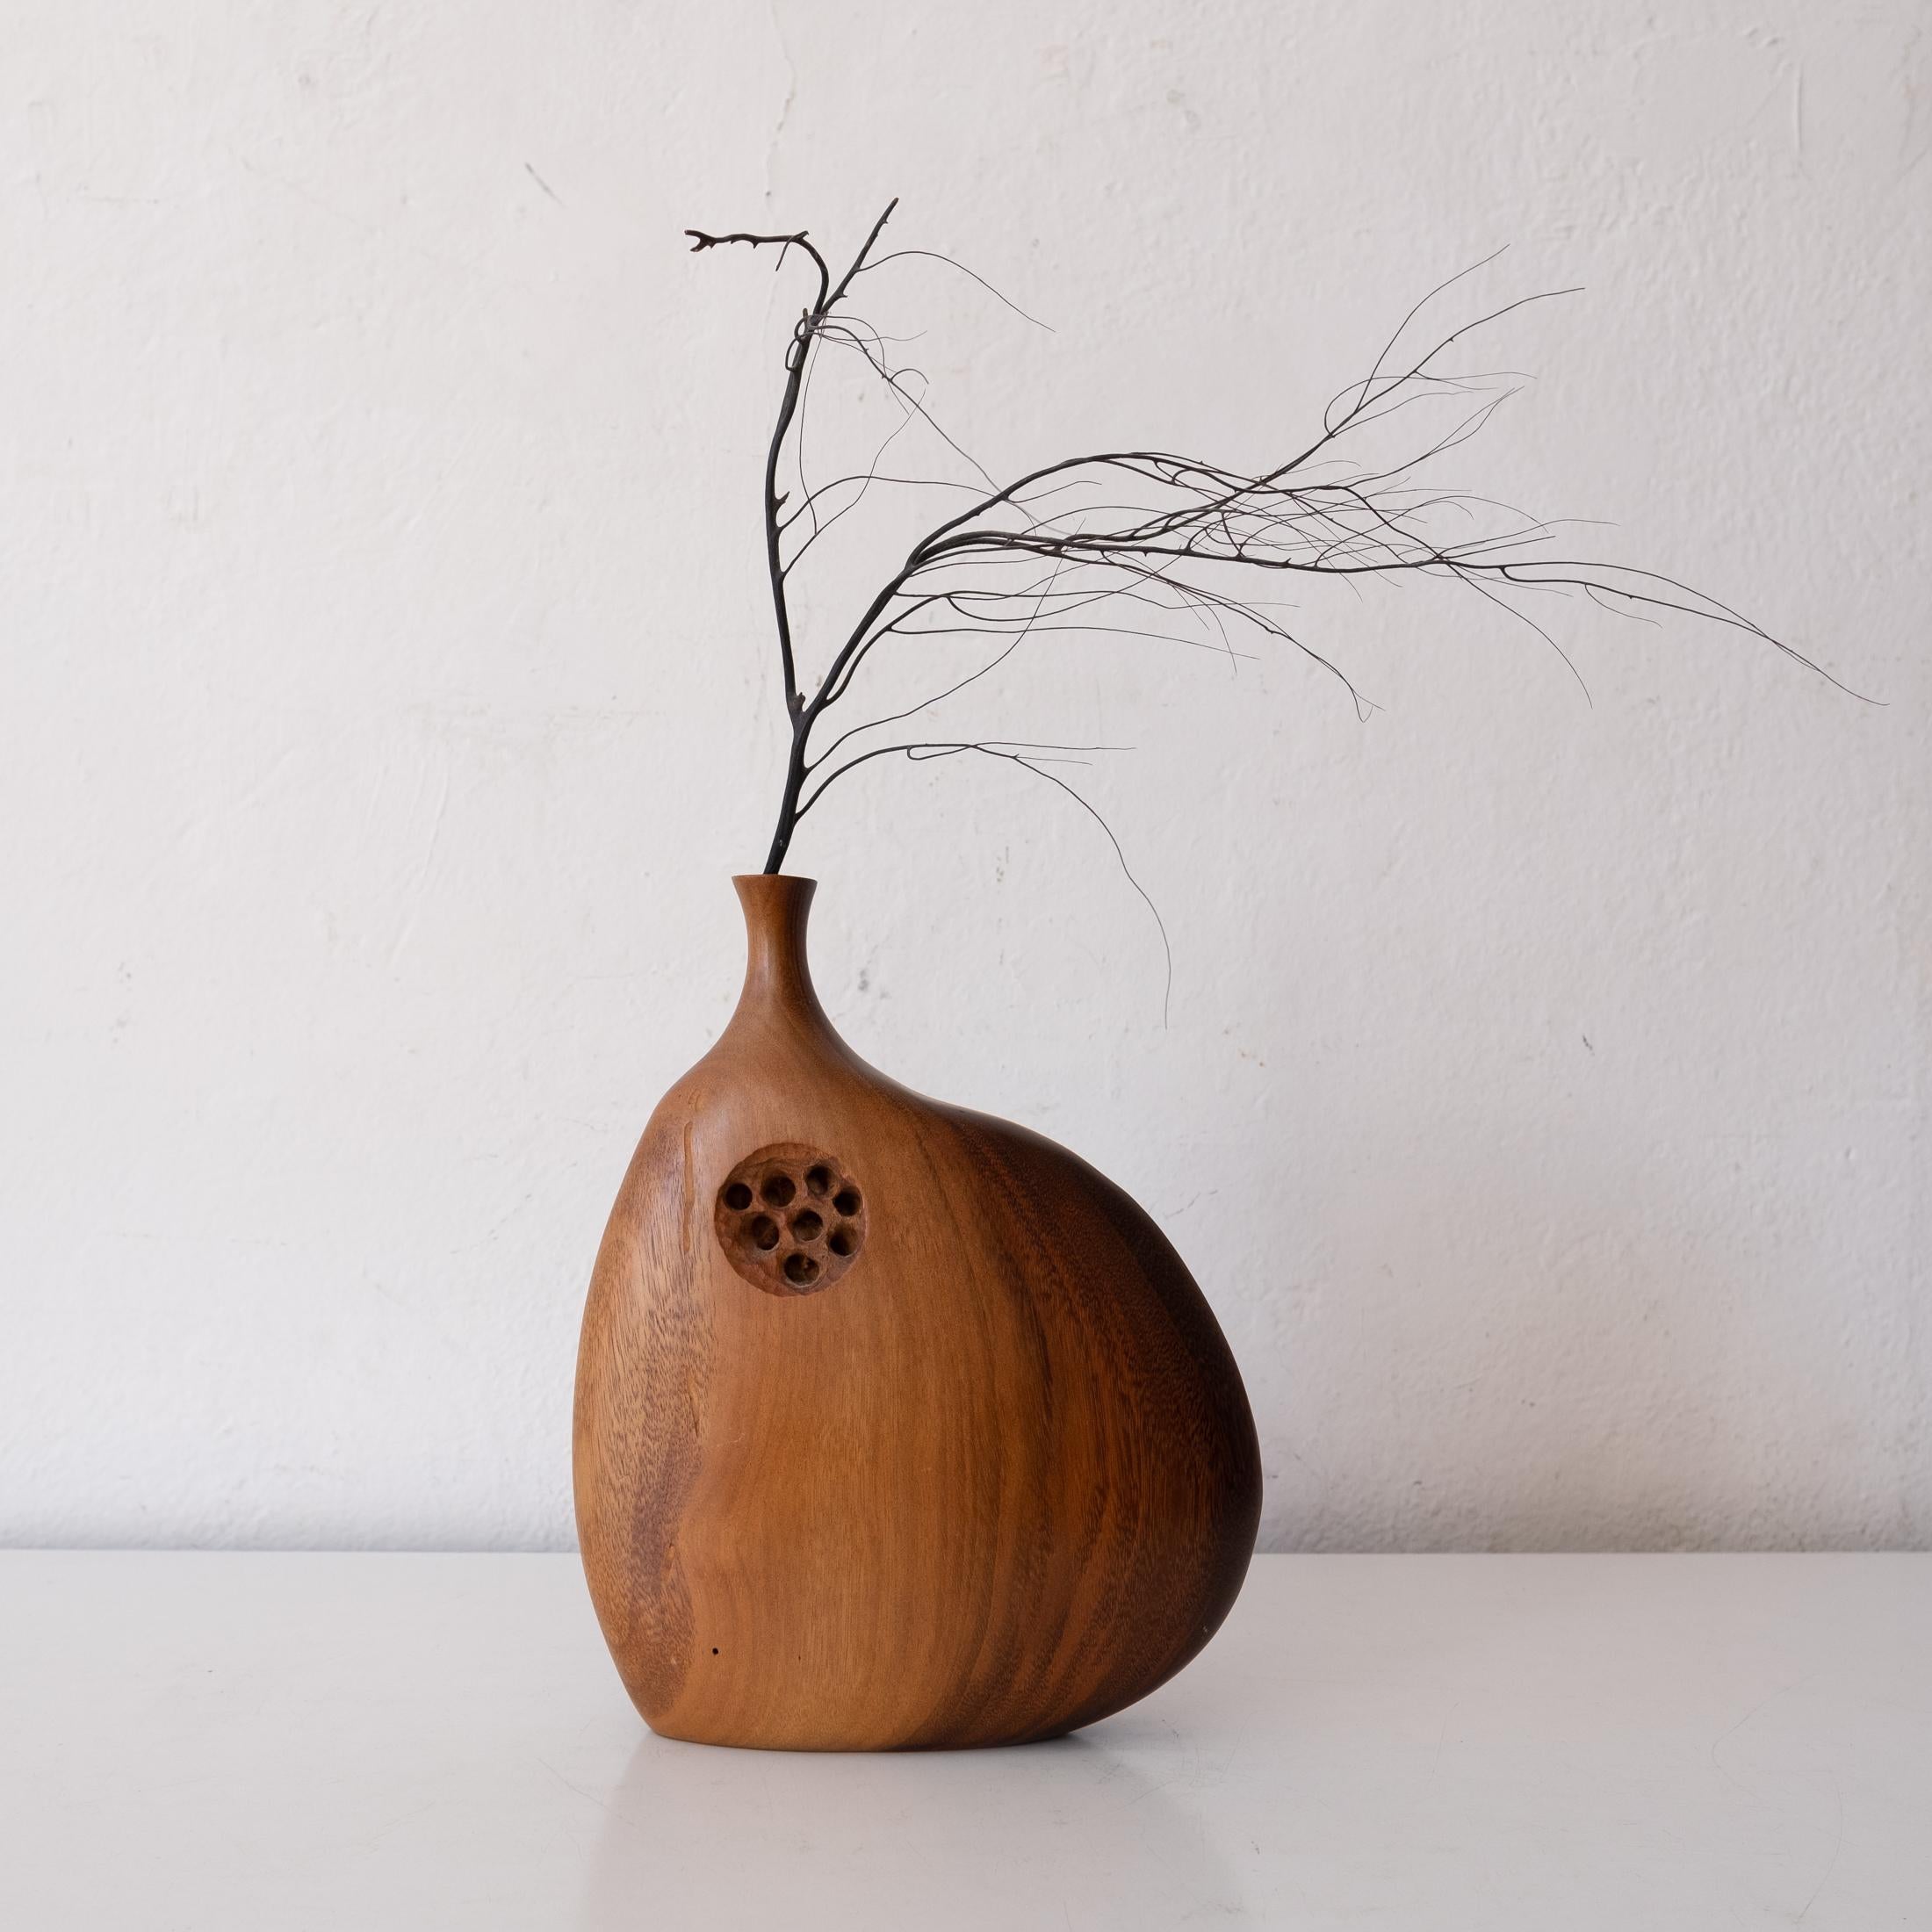 Handcrafted California modern asymmetrical vase by Mendocino artist Doug Ayers. It includes the original gallery price tag specifying the wood species. Goncalo Alves, also known as Tigerwood or South American Zebrawood originates on the East Coast